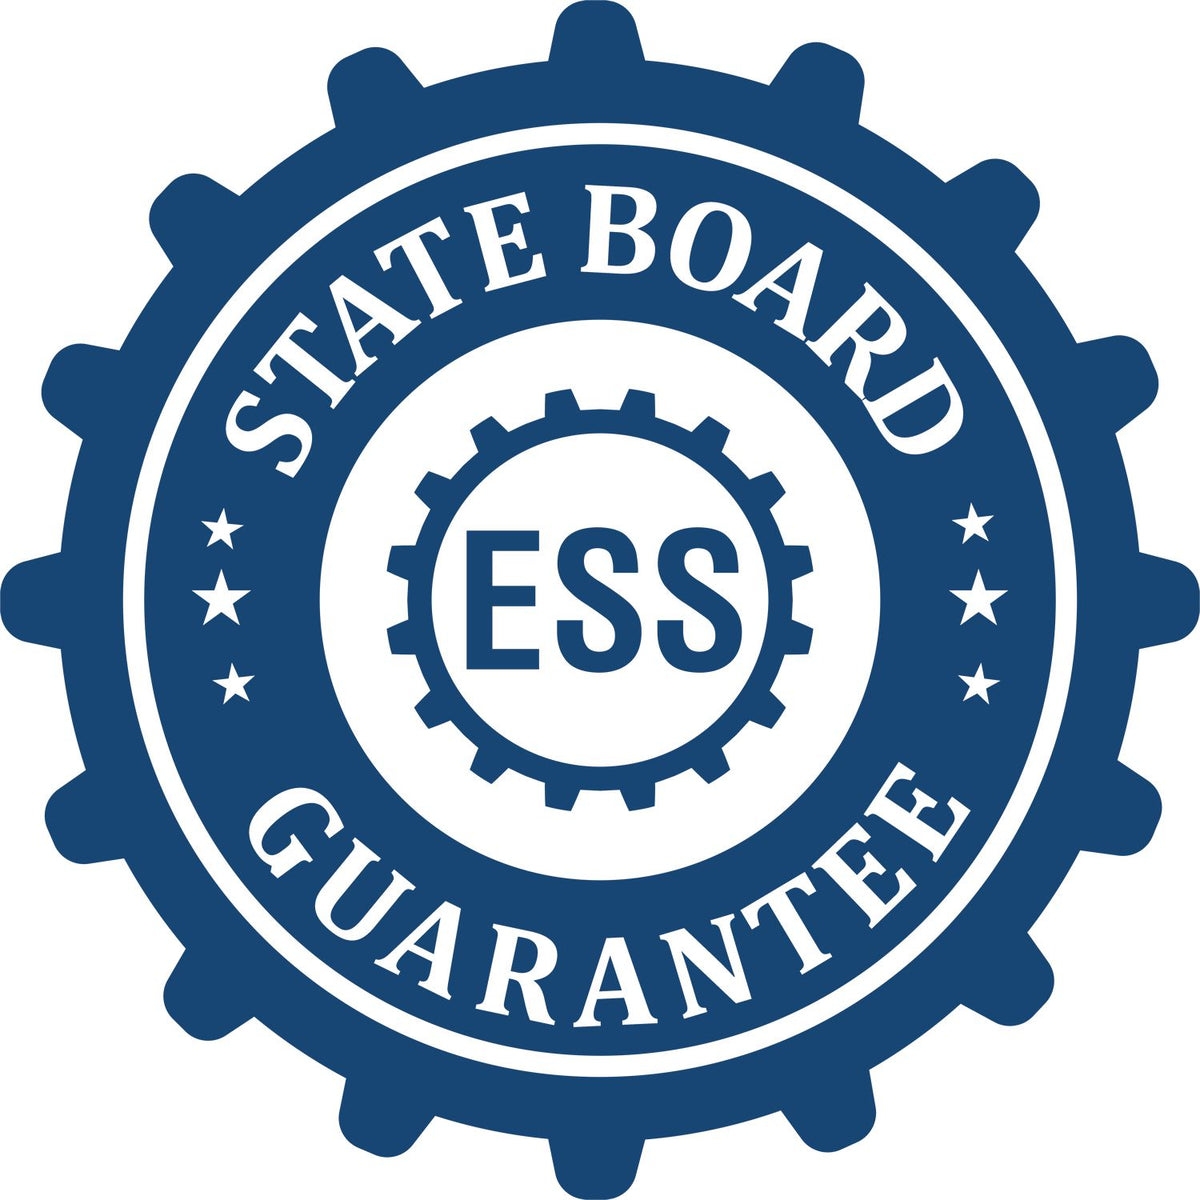 An emblem in a gear shape illustrating a state board guarantee for the Premium MaxLight Pre-Inked Texas Engineering Stamp product.